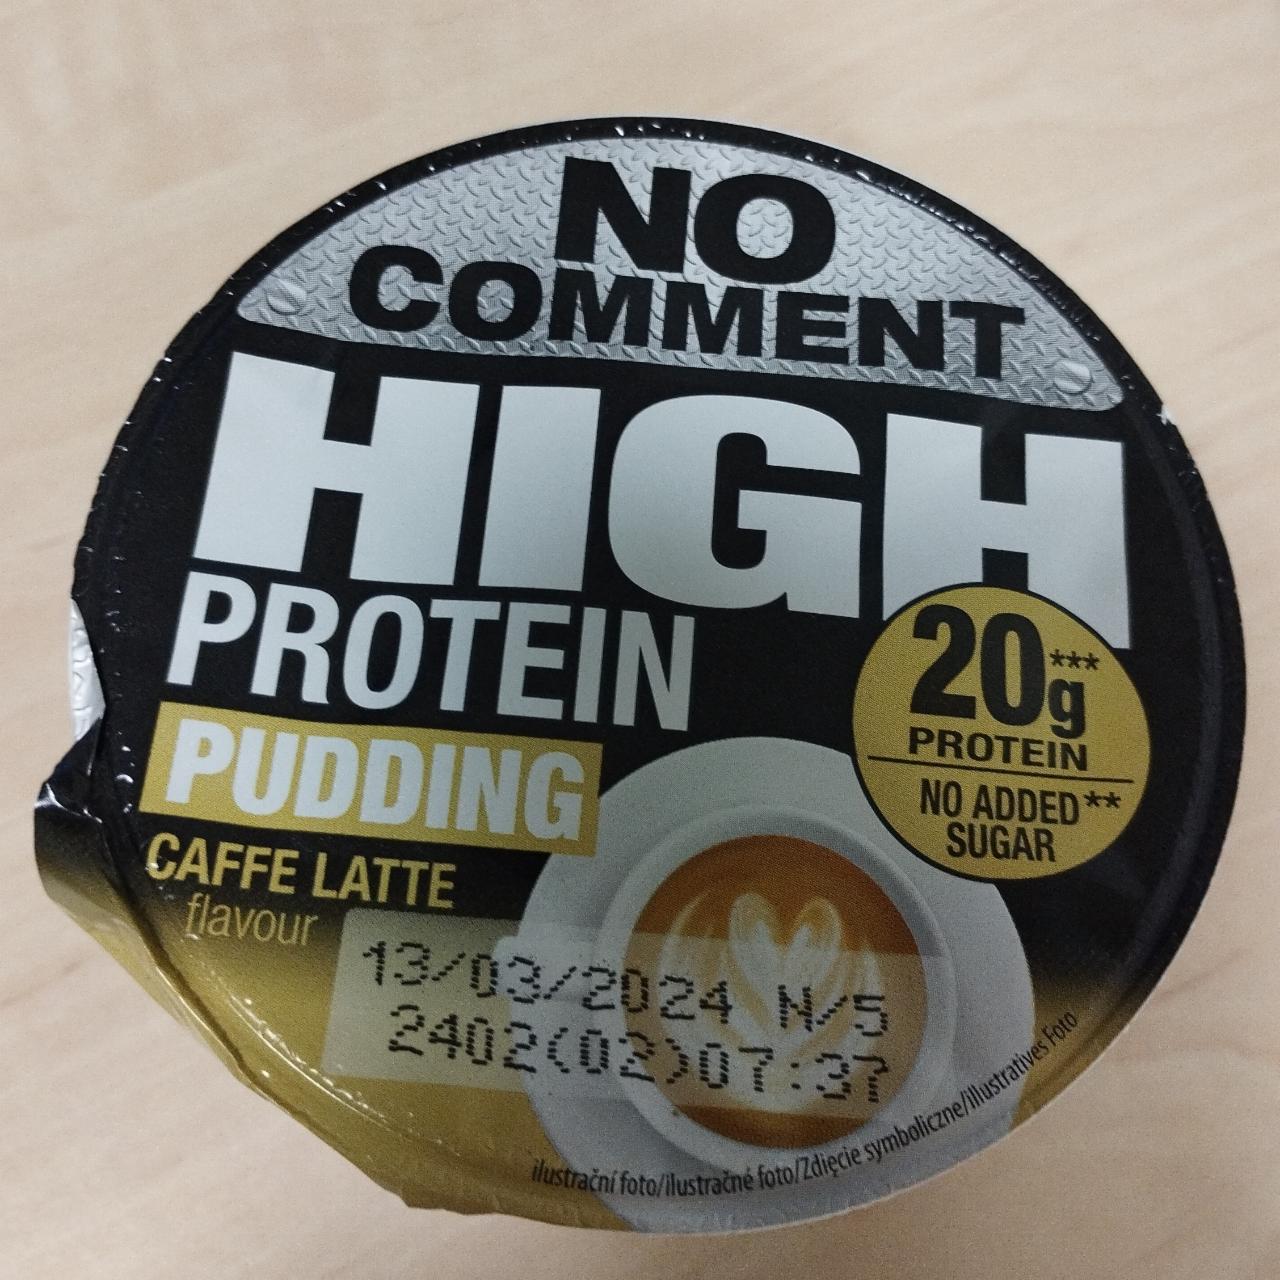 Fotografie - High protein pudding caffe latte flavour 20g protein No comment